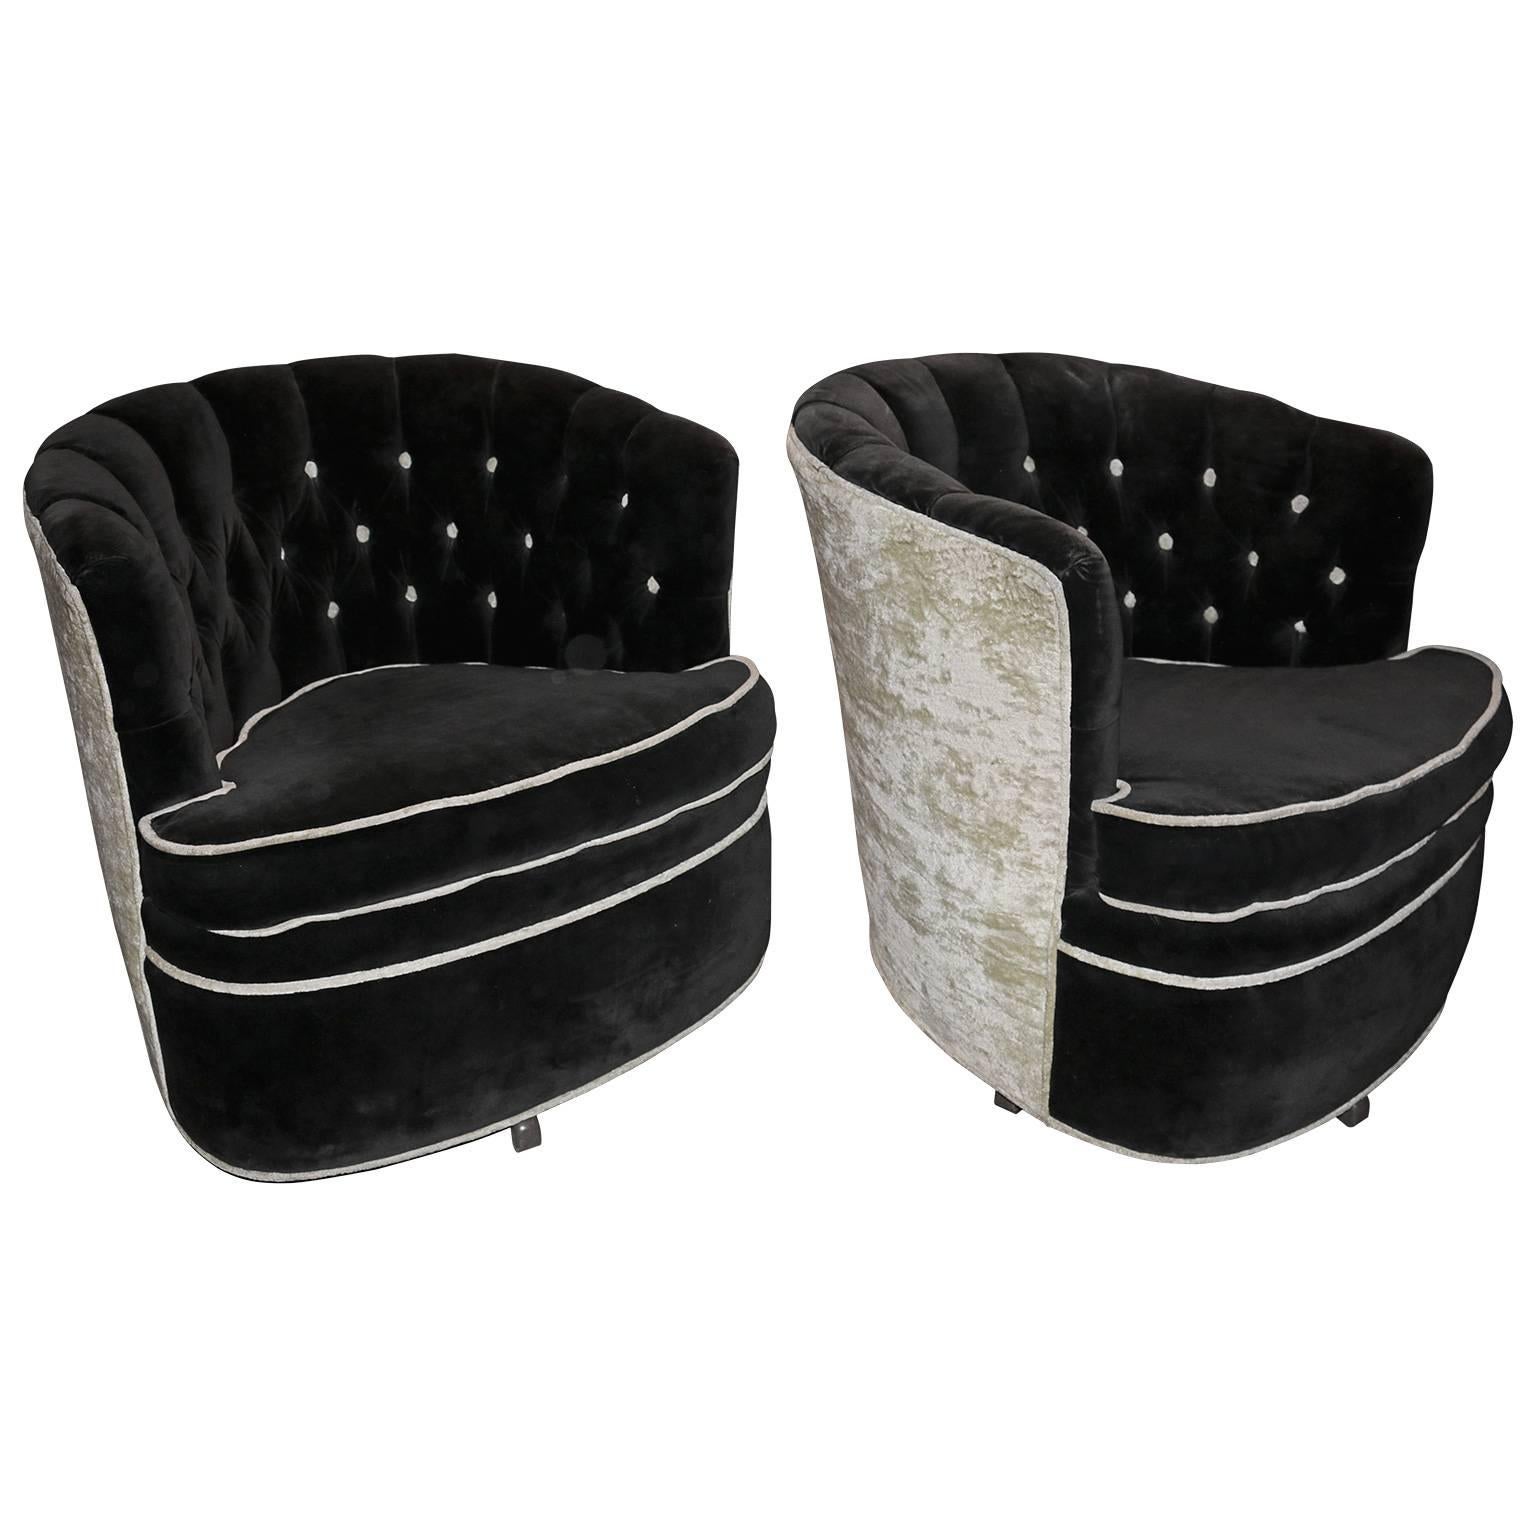 This set of swivel club chairs is made for comfort. Pair of Pouf Club chairs. Black velvet with white outlining and white/beige velvet buttons. The back is also made of a white/beige velvet fabric. This fabric is soft and comfortable.

Seat height